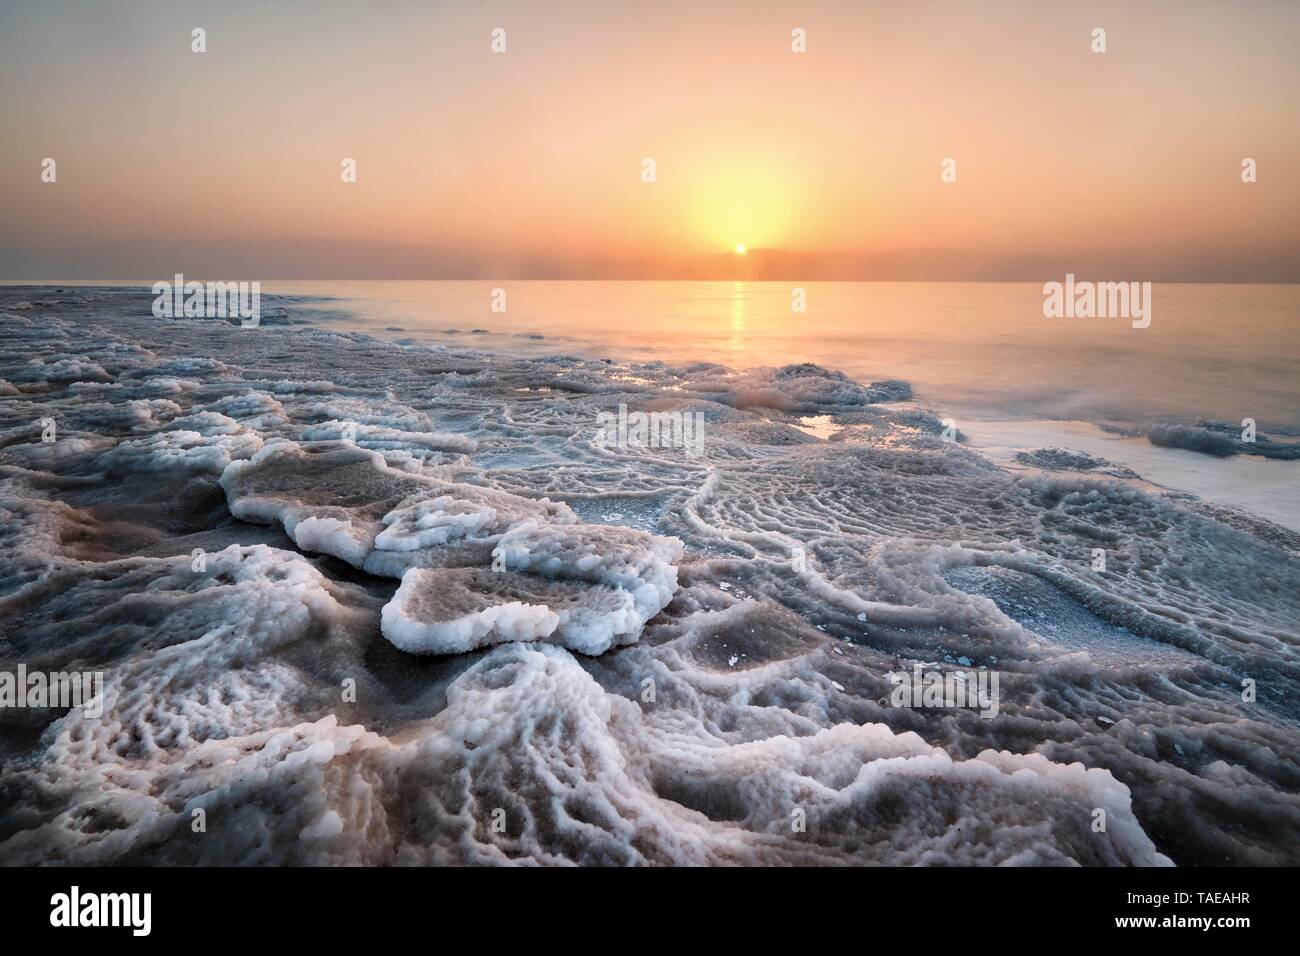 Shore with deposited salt crust, sunset at the Dead Sea, West Bank, Israel Stock Photo